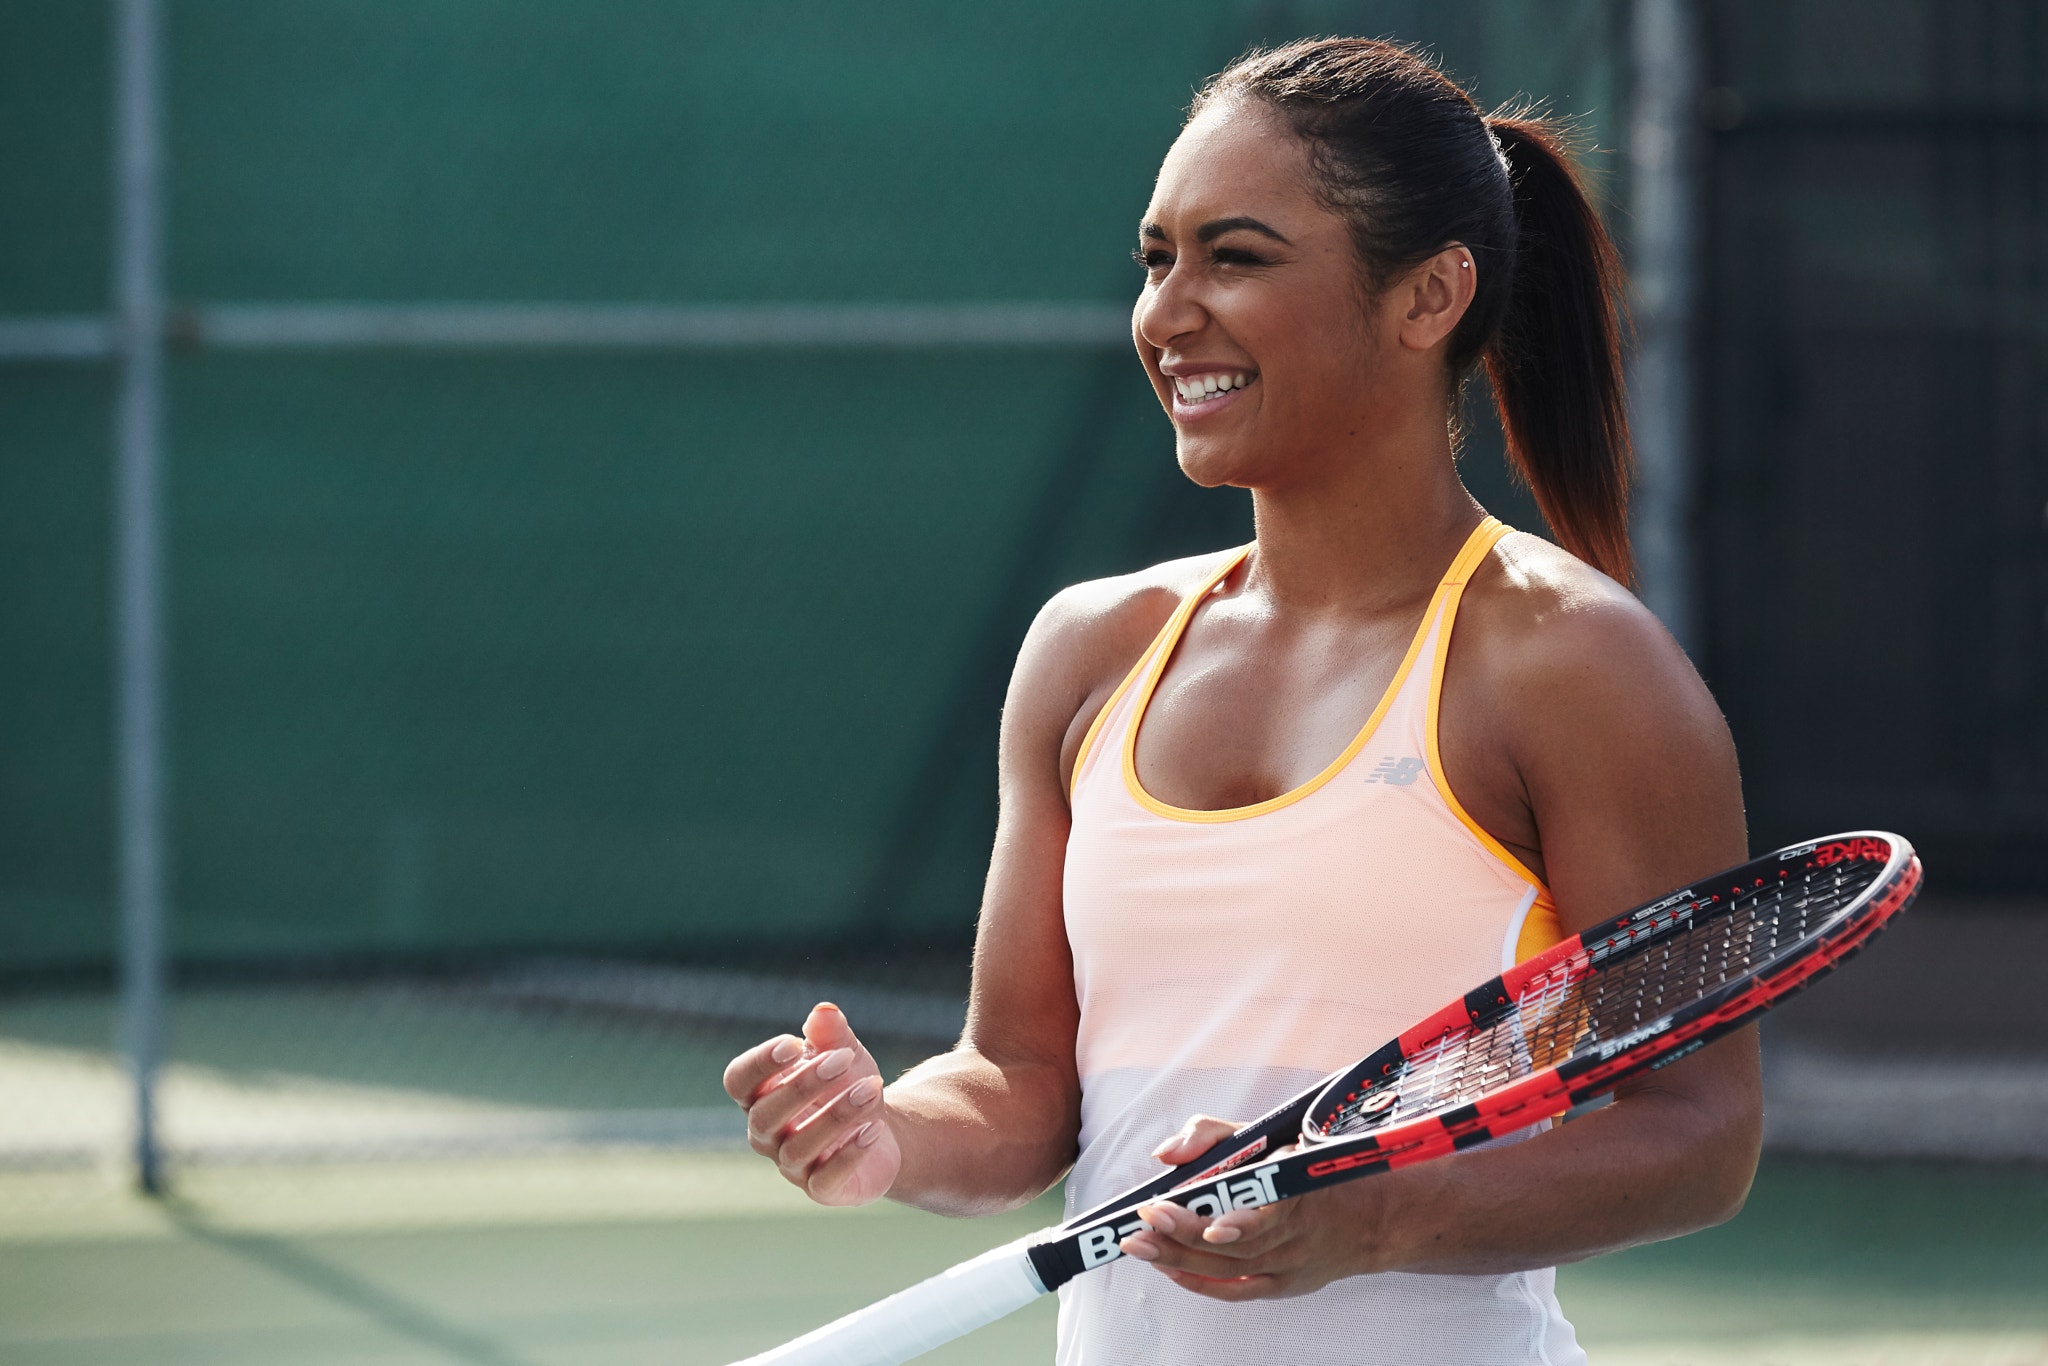 48 Hours in Miami: On Set with Pro Tennis Player Heather Watson, Part 2